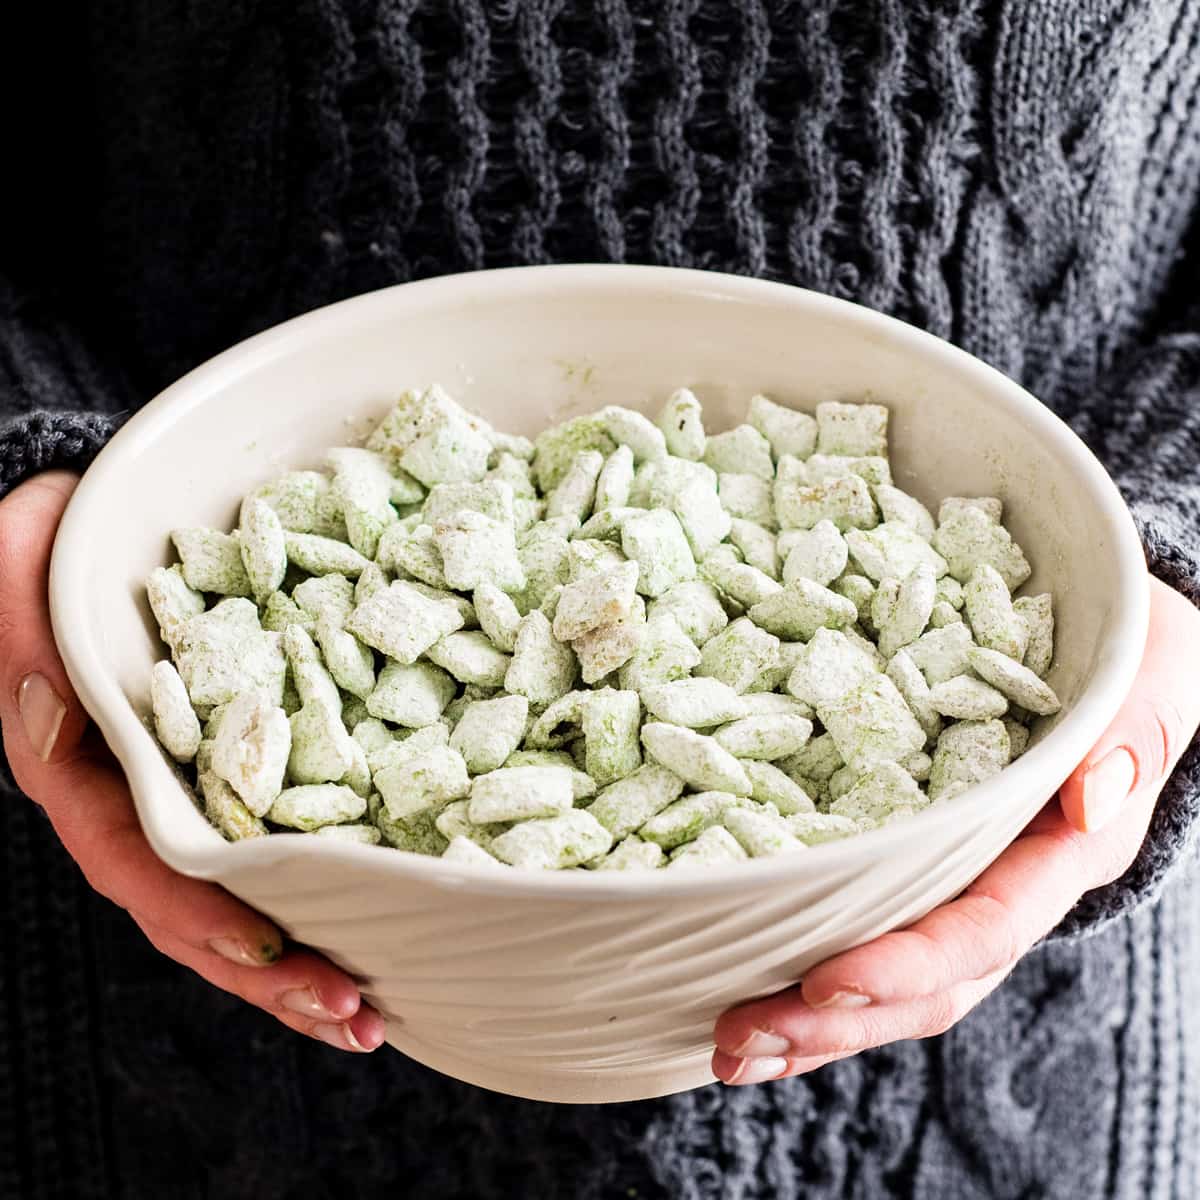 Hands holding a bowl of white chocolate matcha puppy chow